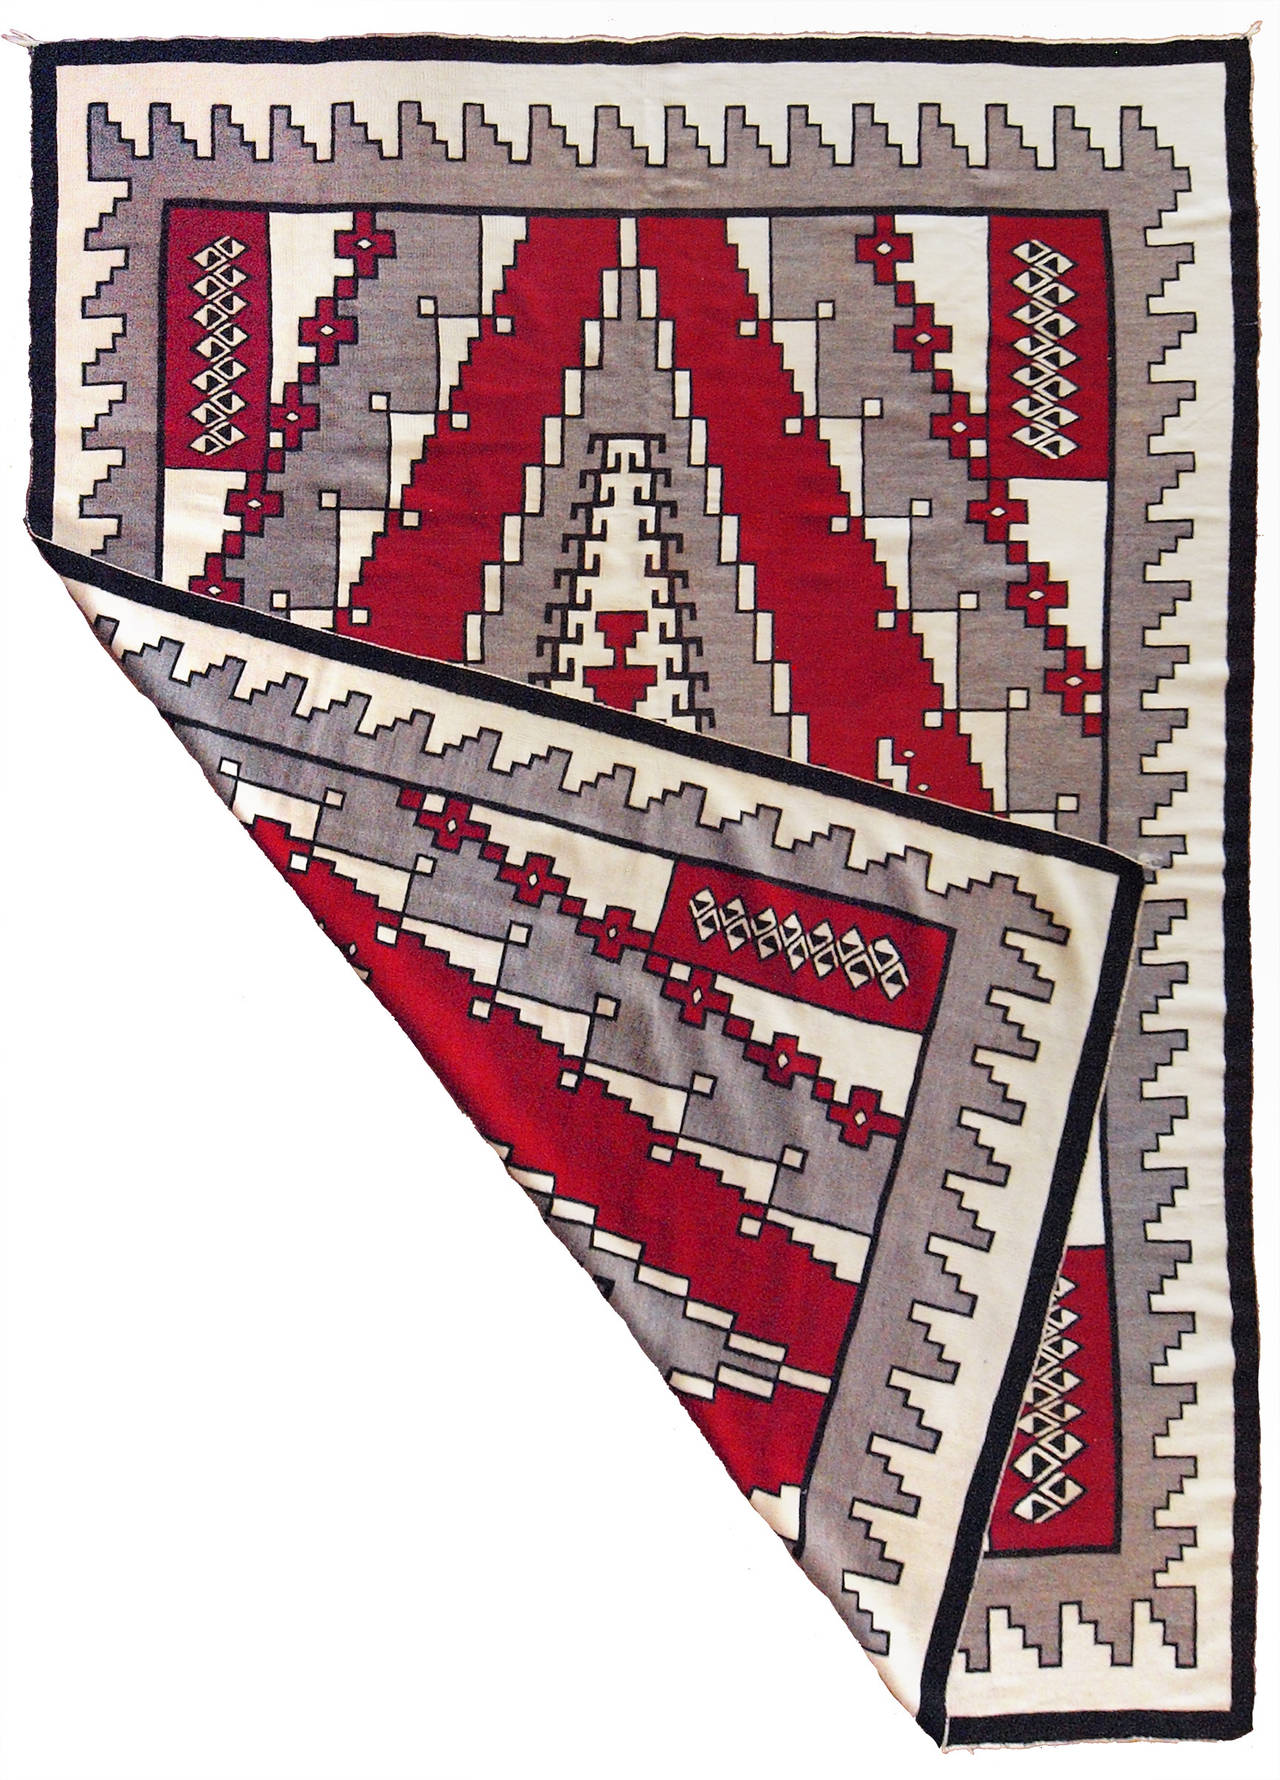 A large Southwestern/Navajo rug with designs and coloring most consistent with textiles which originated at the Ganado Trading Post (founded by John Lorenzo Hubbell at Ganado, Arizona, in 1876). Woven of native handspun wool in natural fleece colors